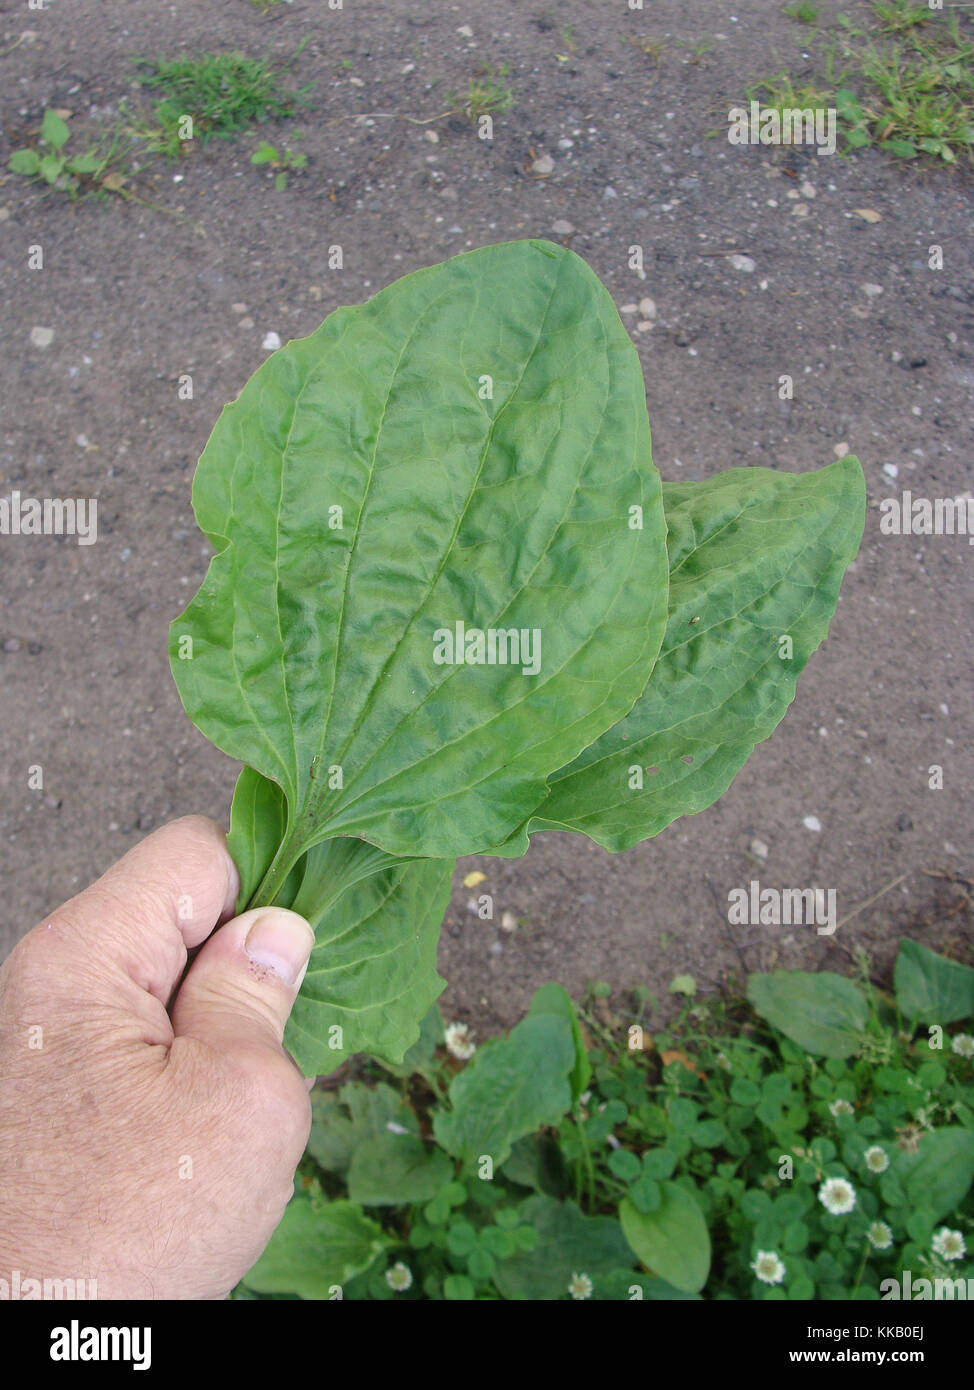 Waild medicinal plant greater plantain leaves on hand close up Stock Photo